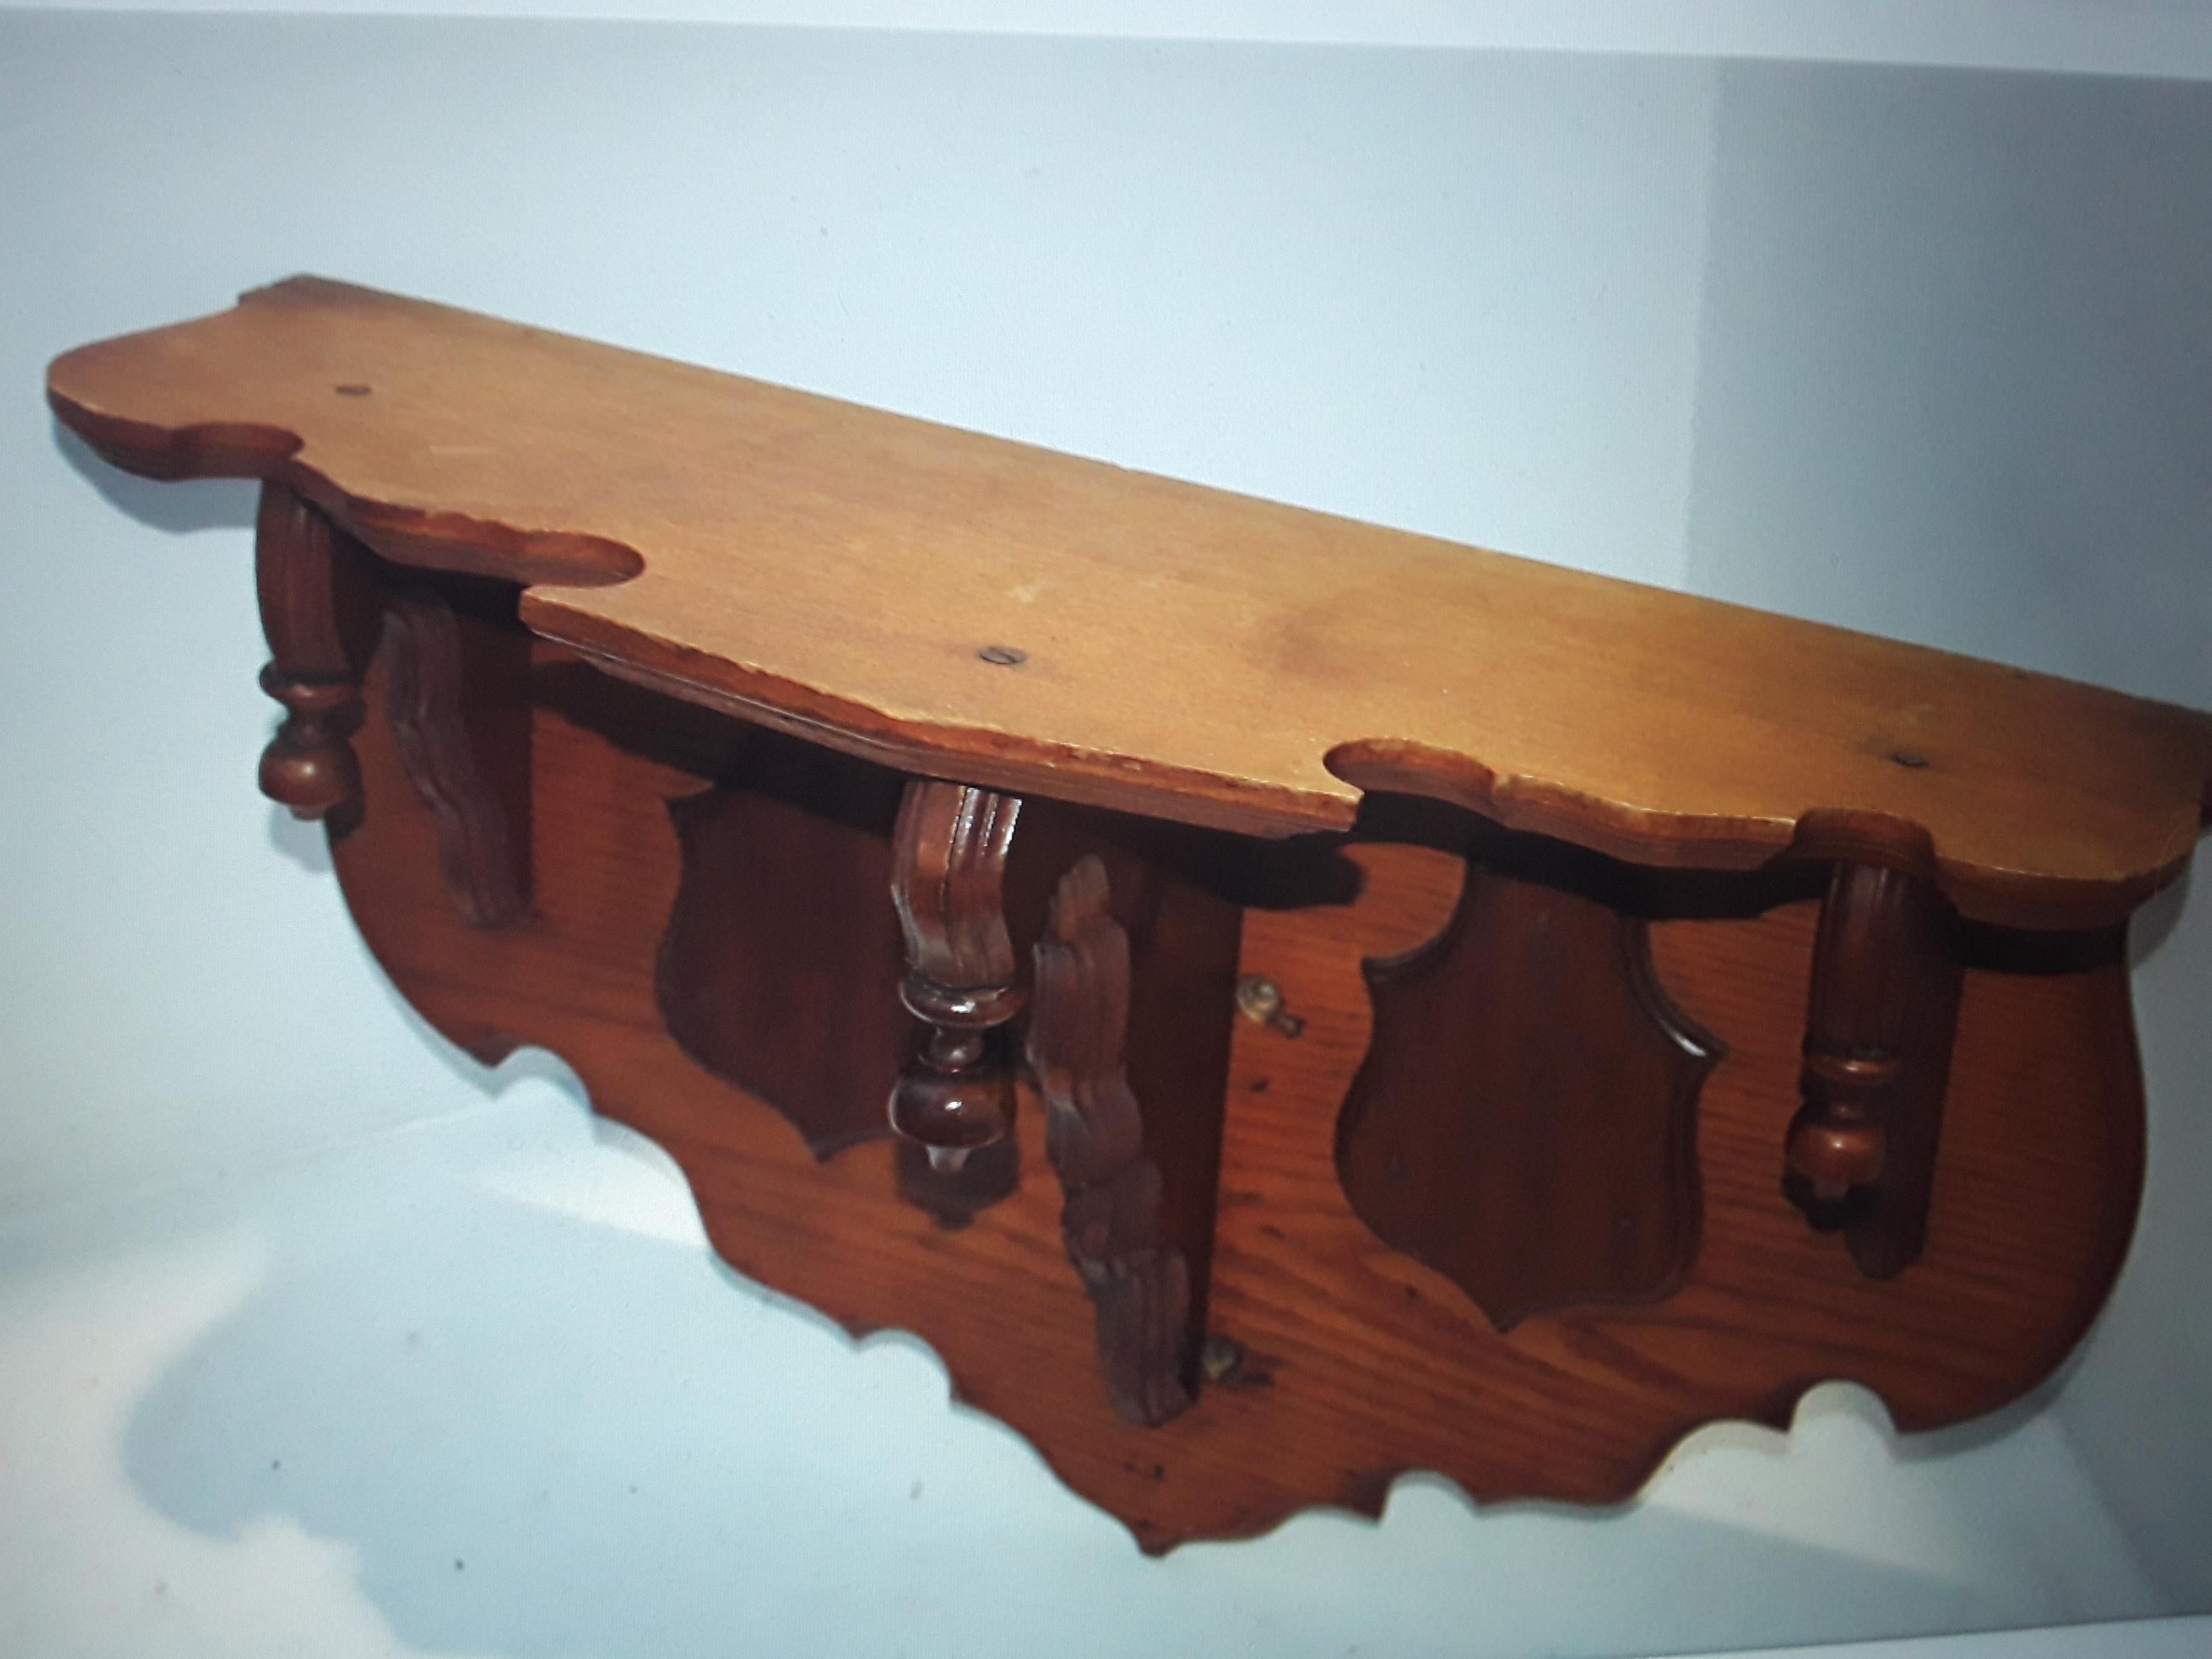 North American 1950's Vintage Arts & Crafts style Floating Hall Shelf. For Sale